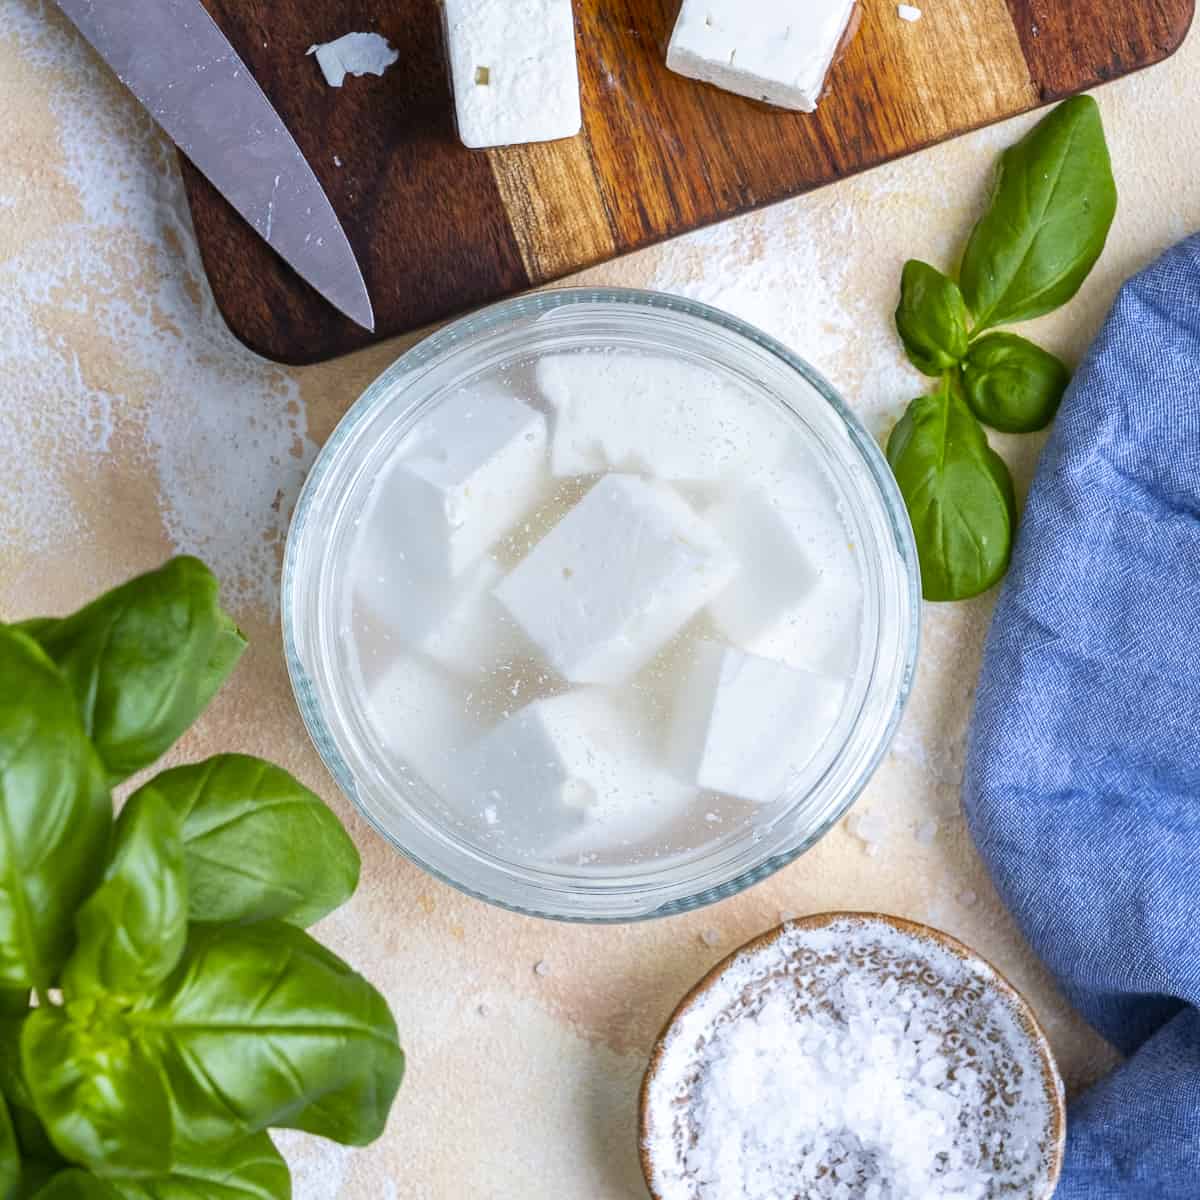 How To Store Feta Cheese (In Brine)